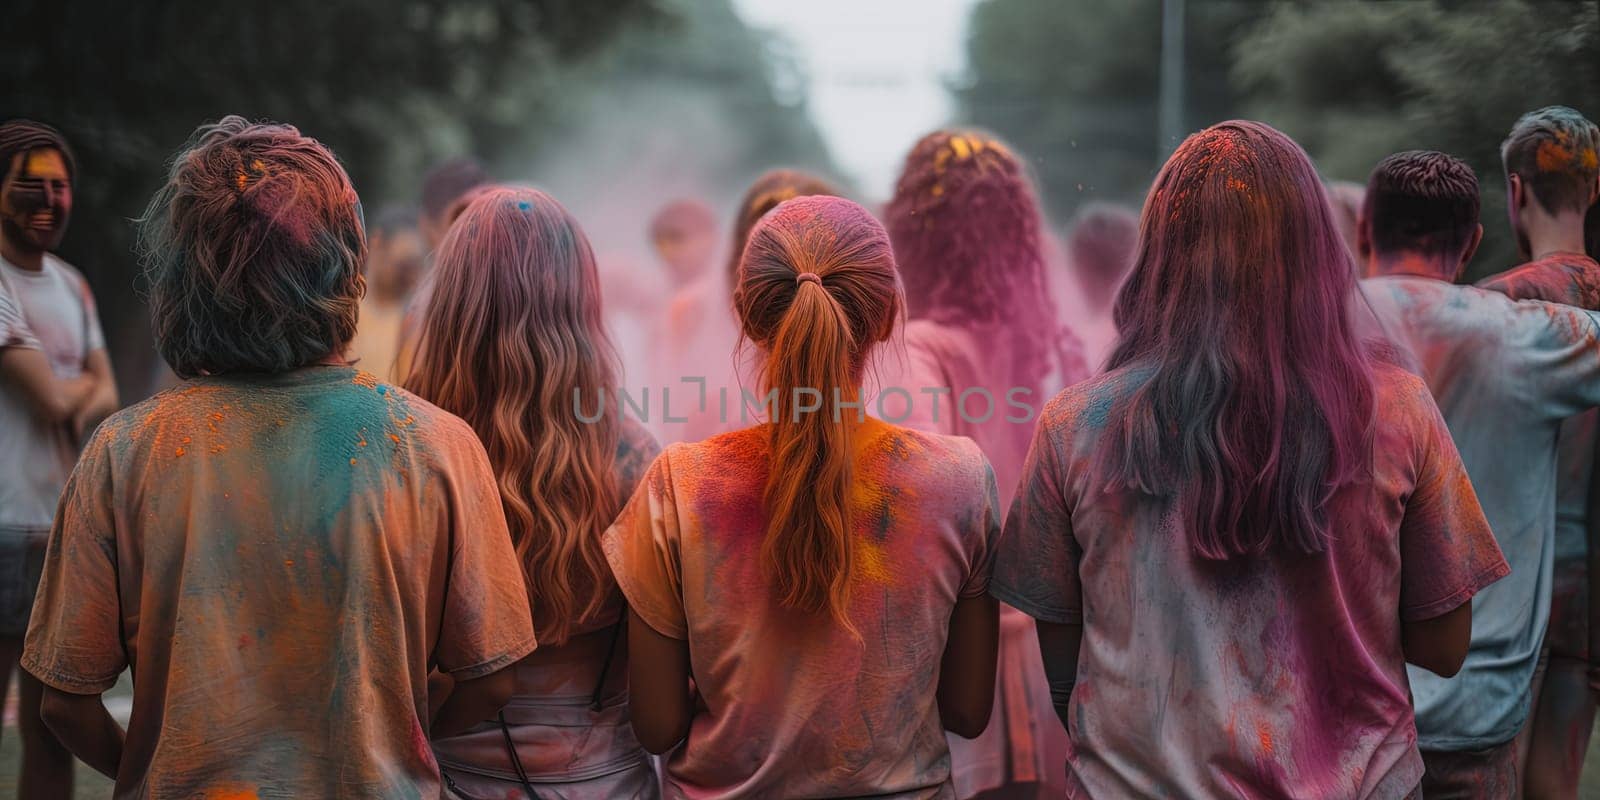 People In Holi Powder Paint Celebrating Holidays Outdoors In Crowd